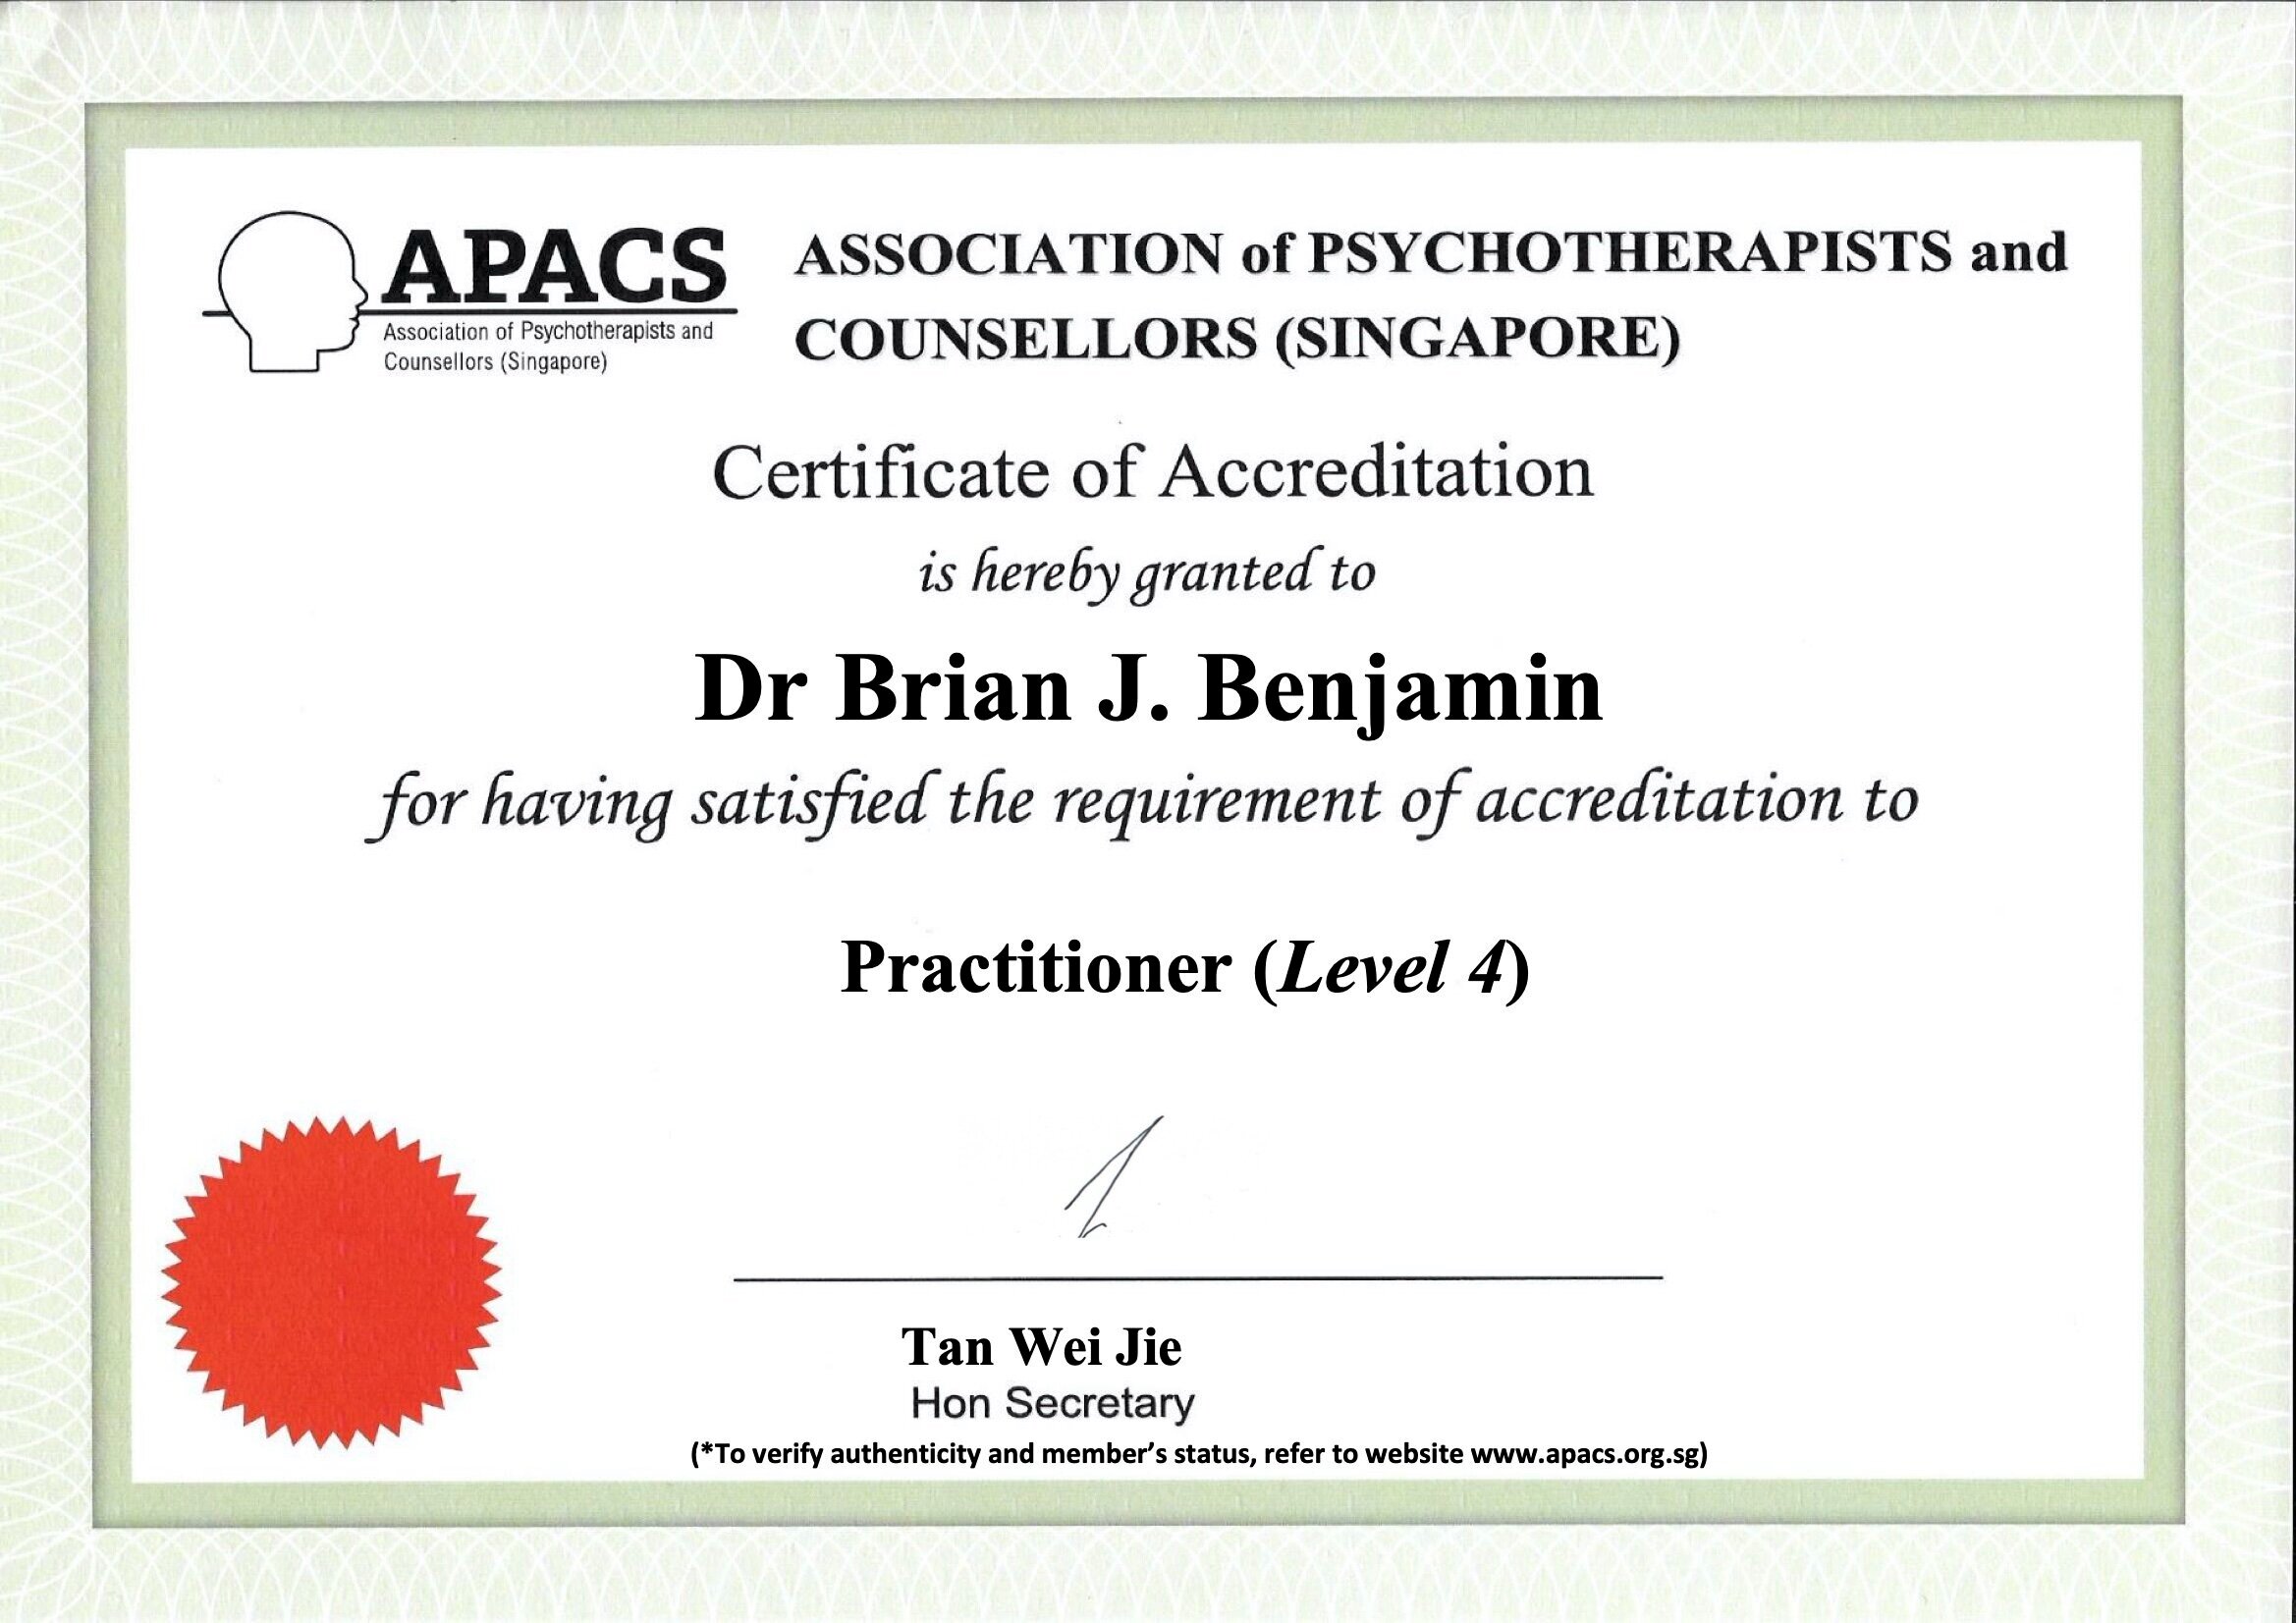 Association of Psychotherapists and Counsellors (Singapore)